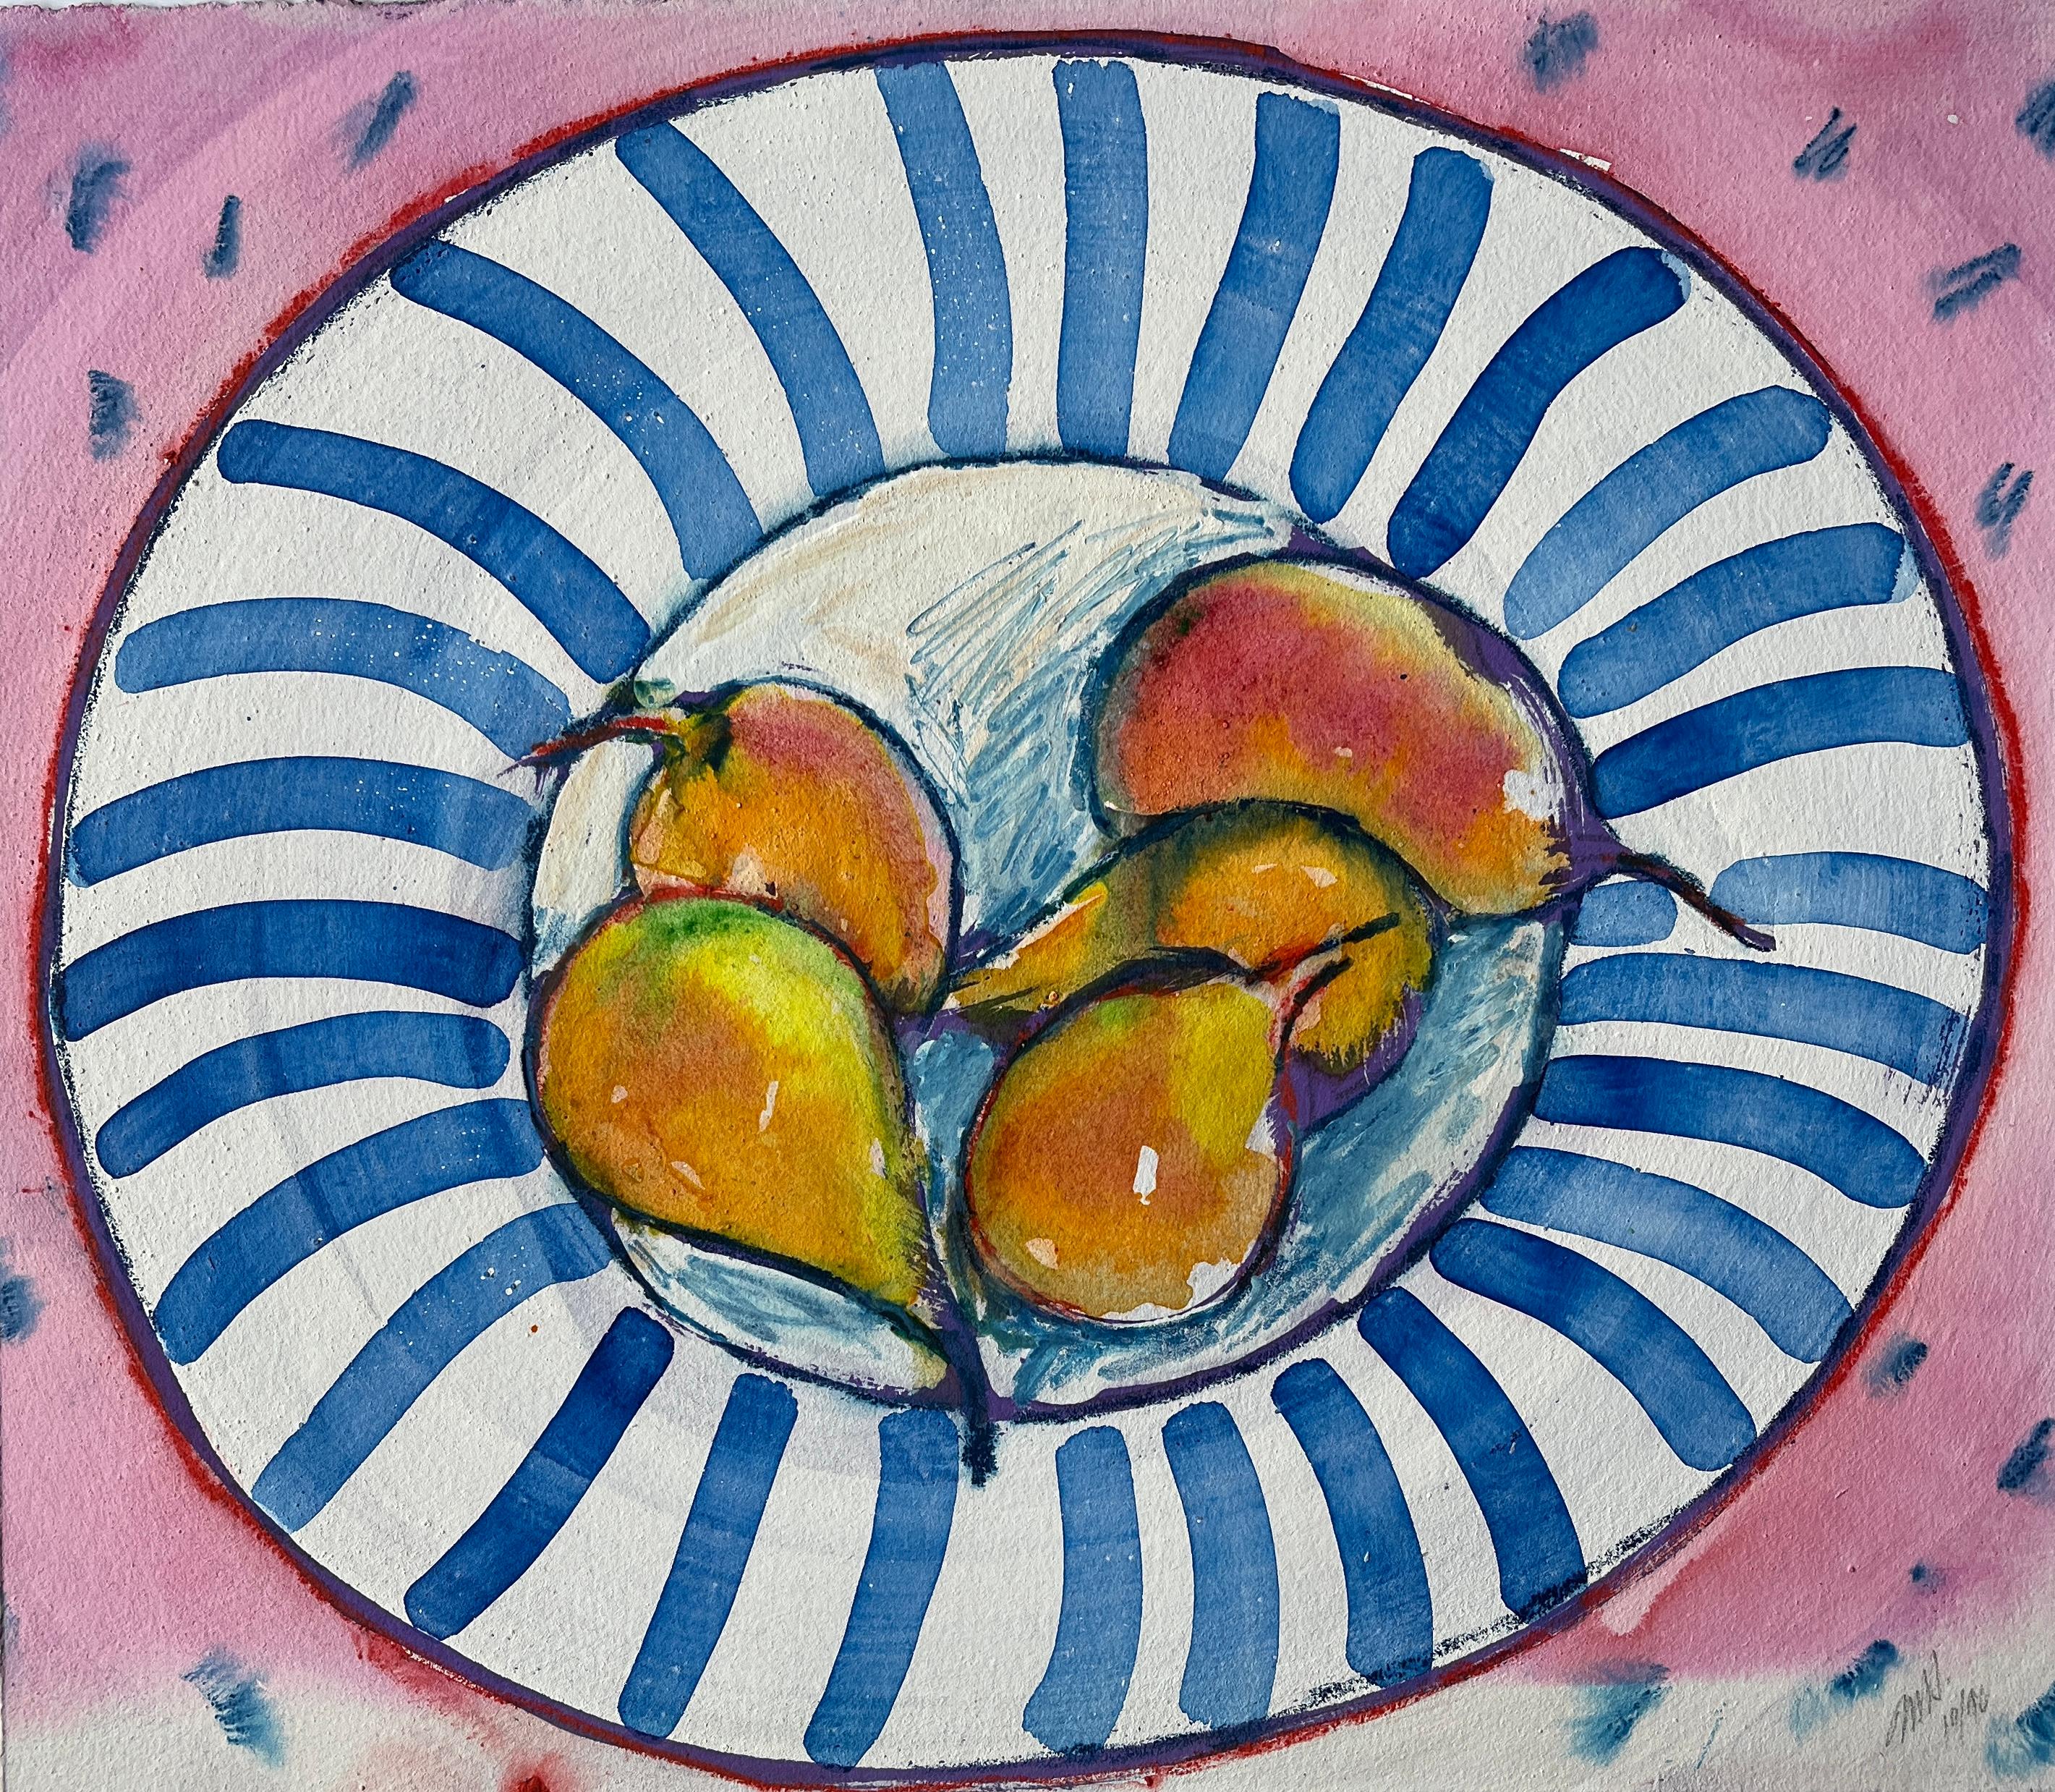 "Pears in Striped Bowl" Painting & Pastel Still Life Jack Hooper